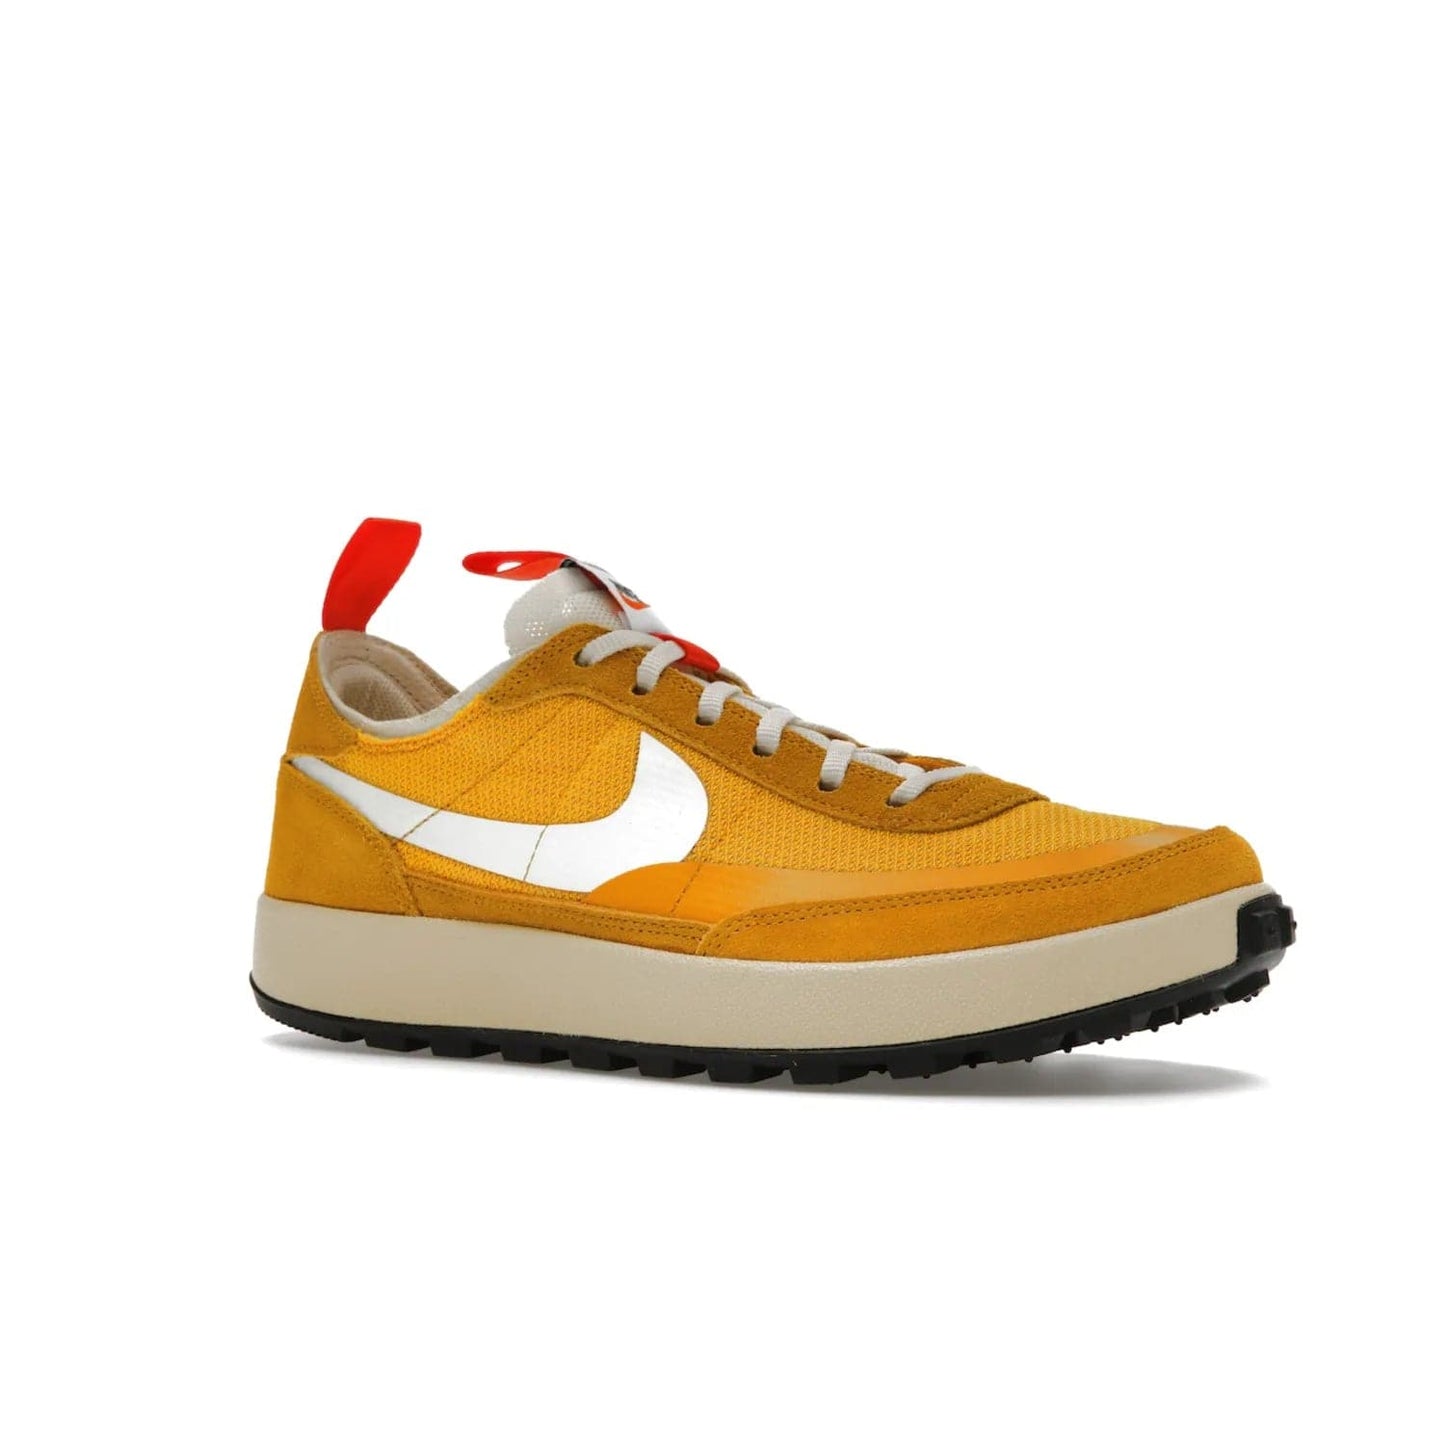 NikeCraft General Purpose Shoe Tom Sachs Archive Dark Sulfur - Image 4 - Only at www.BallersClubKickz.com - Collab between Nike & Tom Sachs. The NikeCraft General Purpose Shoe features dark sulfur mesh upper, suede overlays, contrasting white Swoosh and orange tabs. EVA cushioning & black waffle-traction rubber outsole ensures performance. Stylish & perfect for any occasion, the shoe released September 2, 2022.